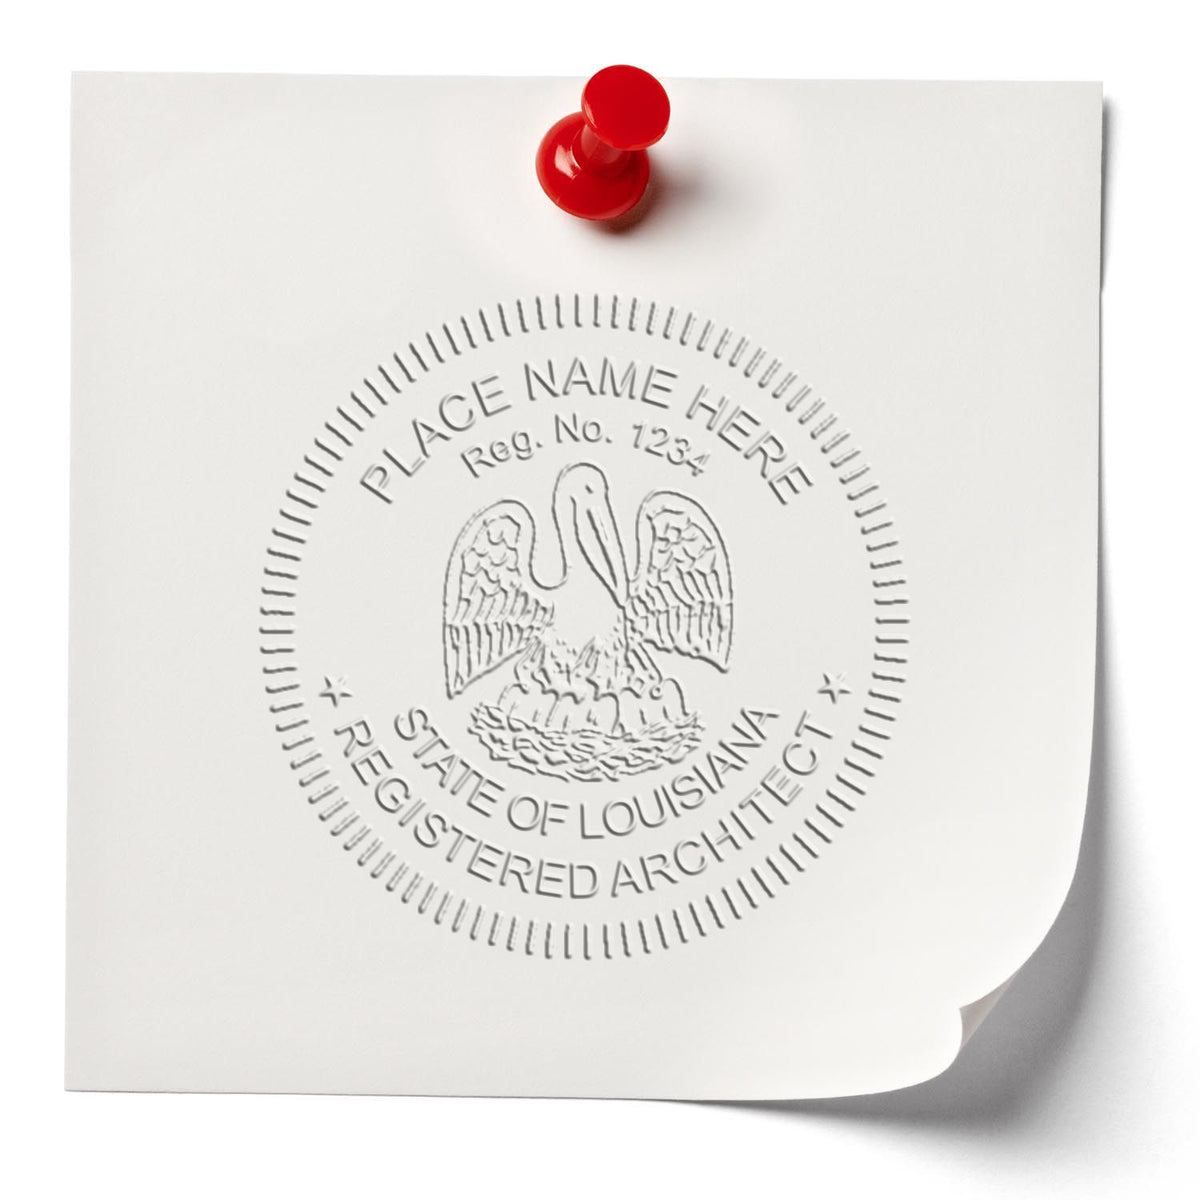 A lifestyle photo showing a stamped image of the Louisiana Desk Architect Embossing Seal on a piece of paper